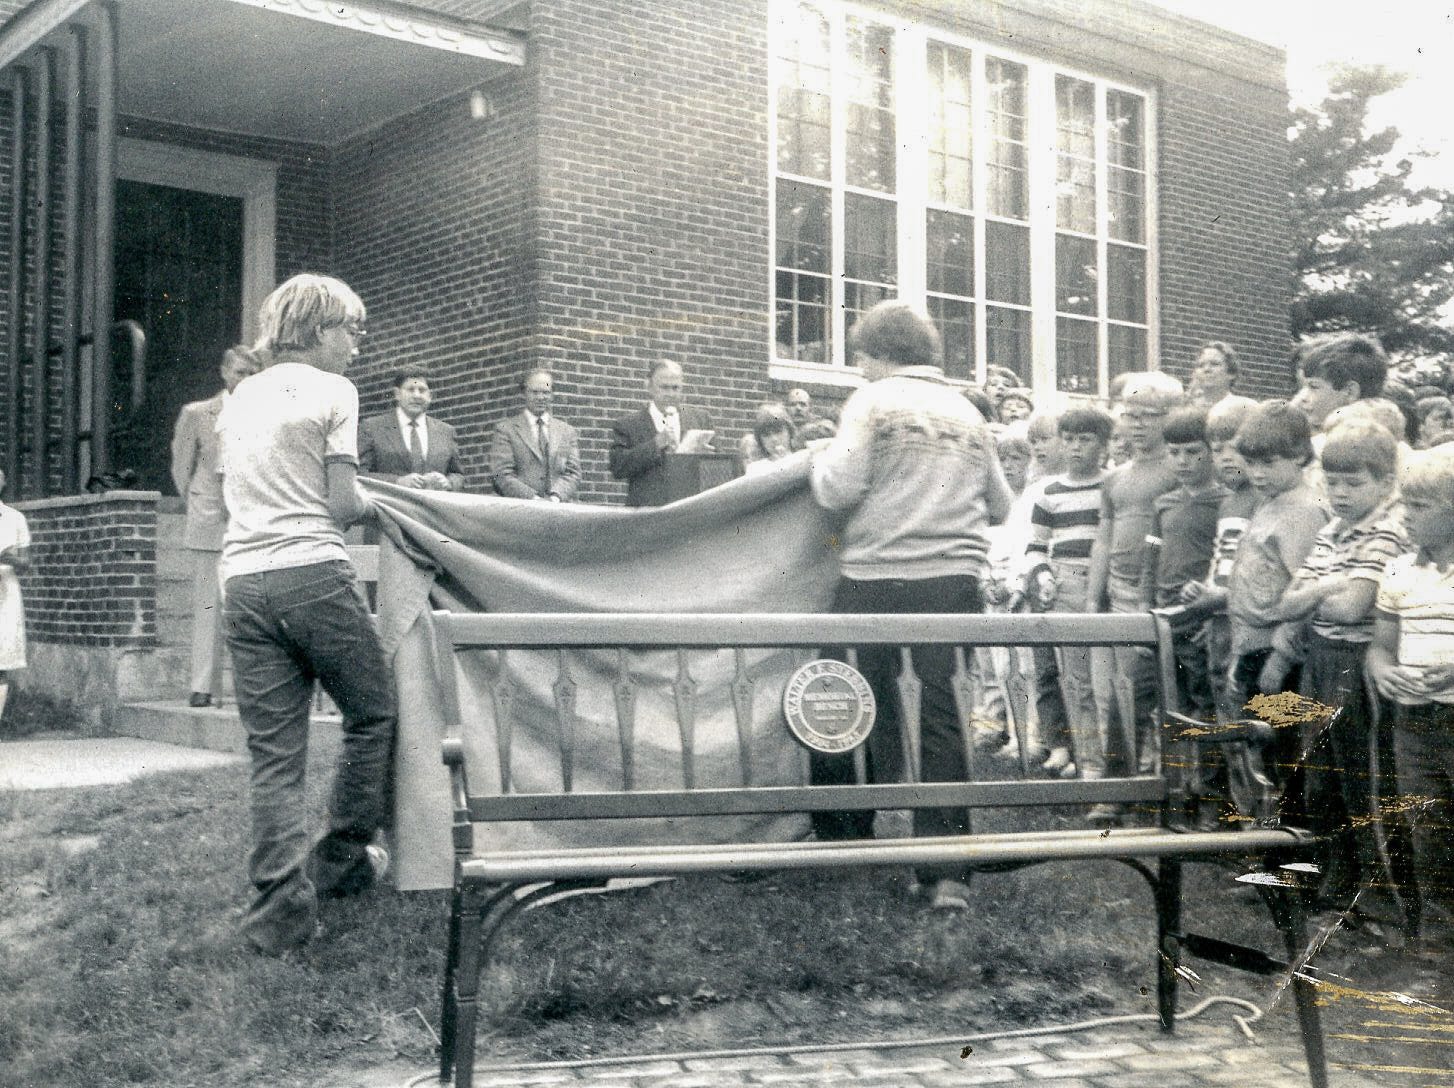 Unveiling the bench